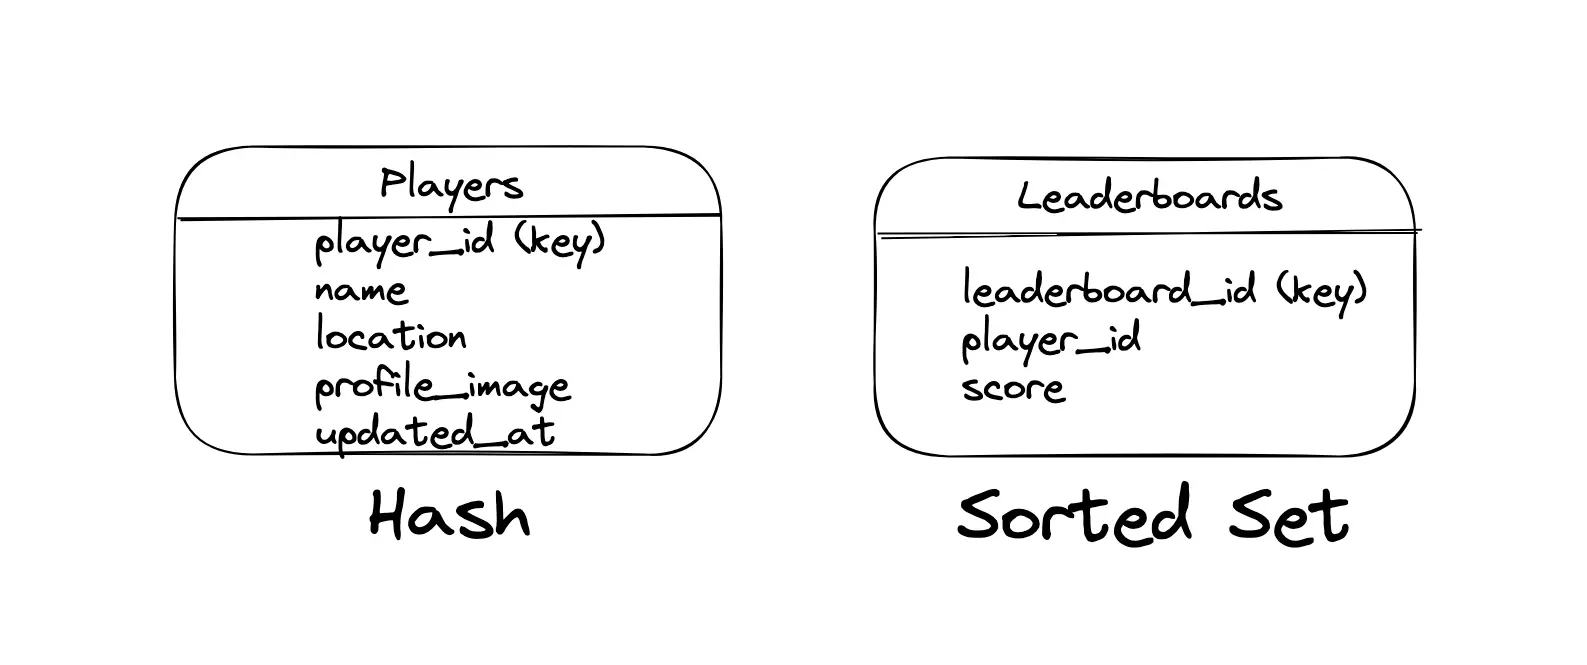 Building better leaderboards. Beyond the simple score list